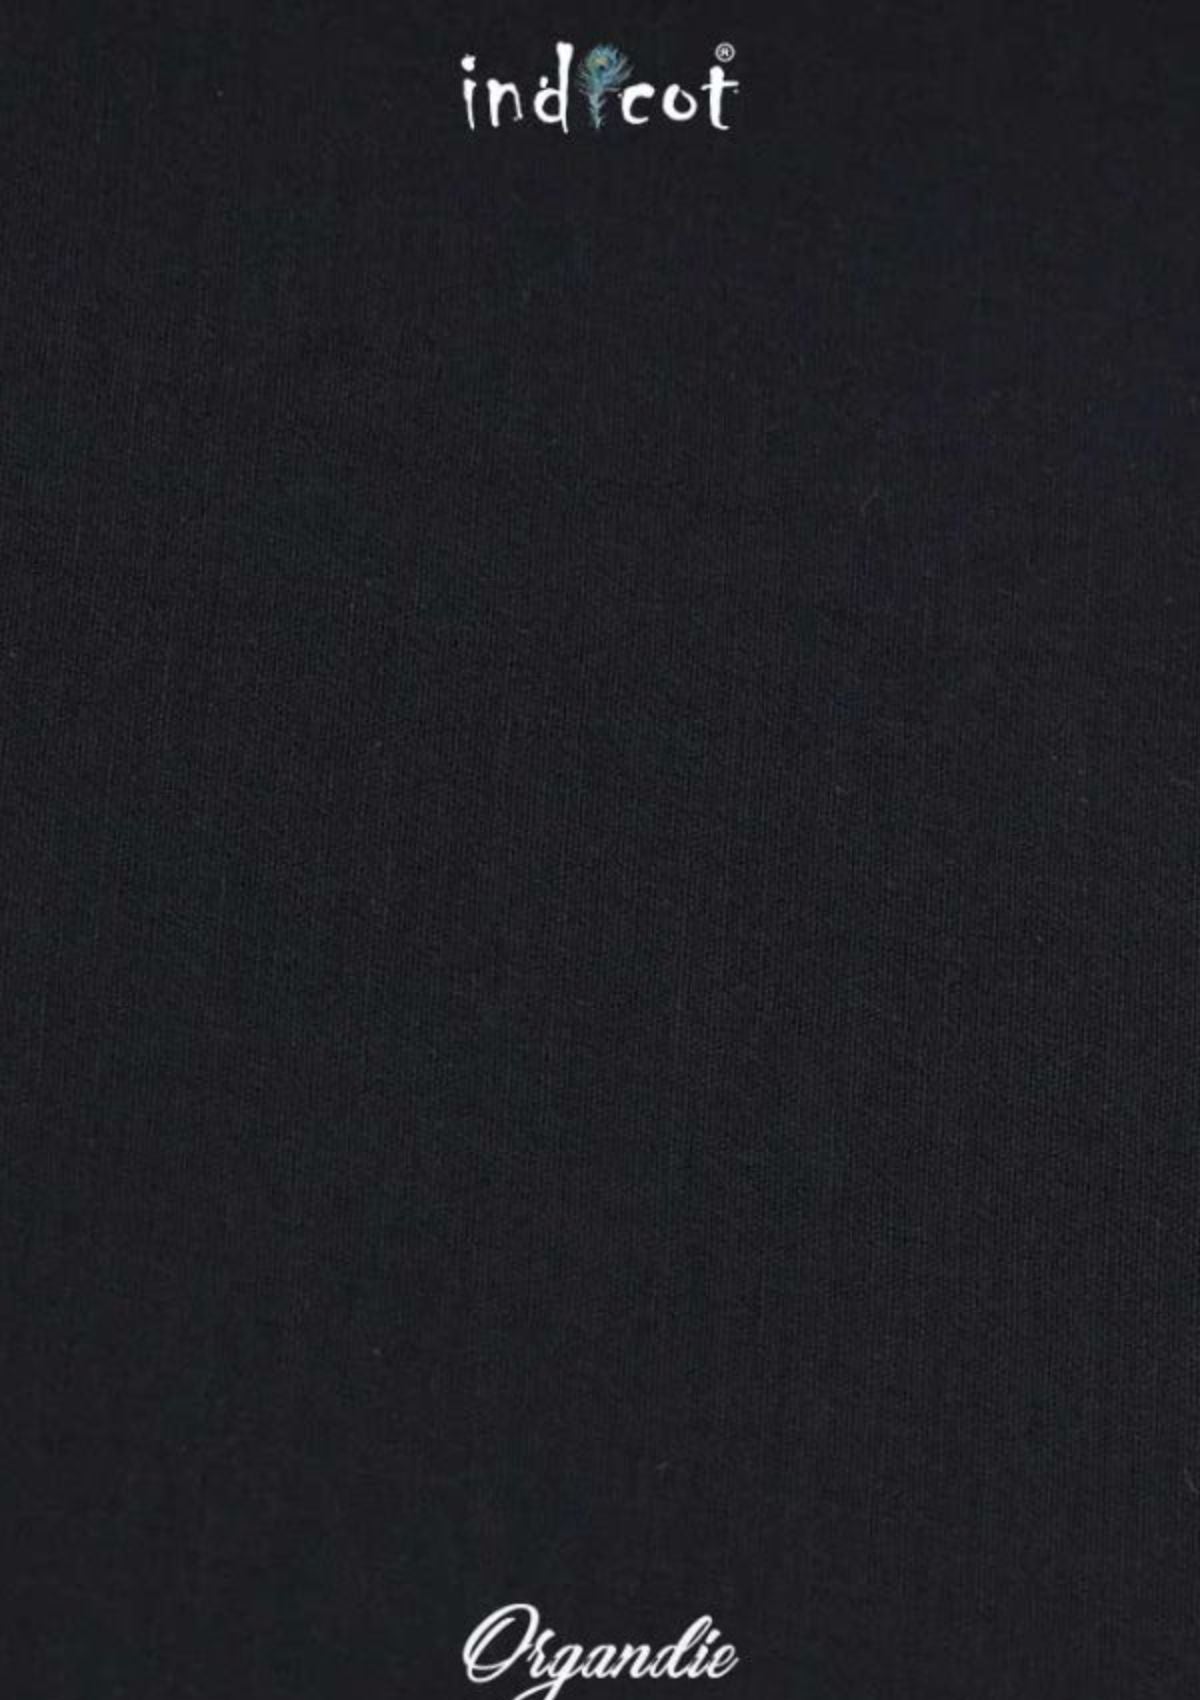 Indicot Organdie Color#16 Black available at Saleem Fabrics Traditions